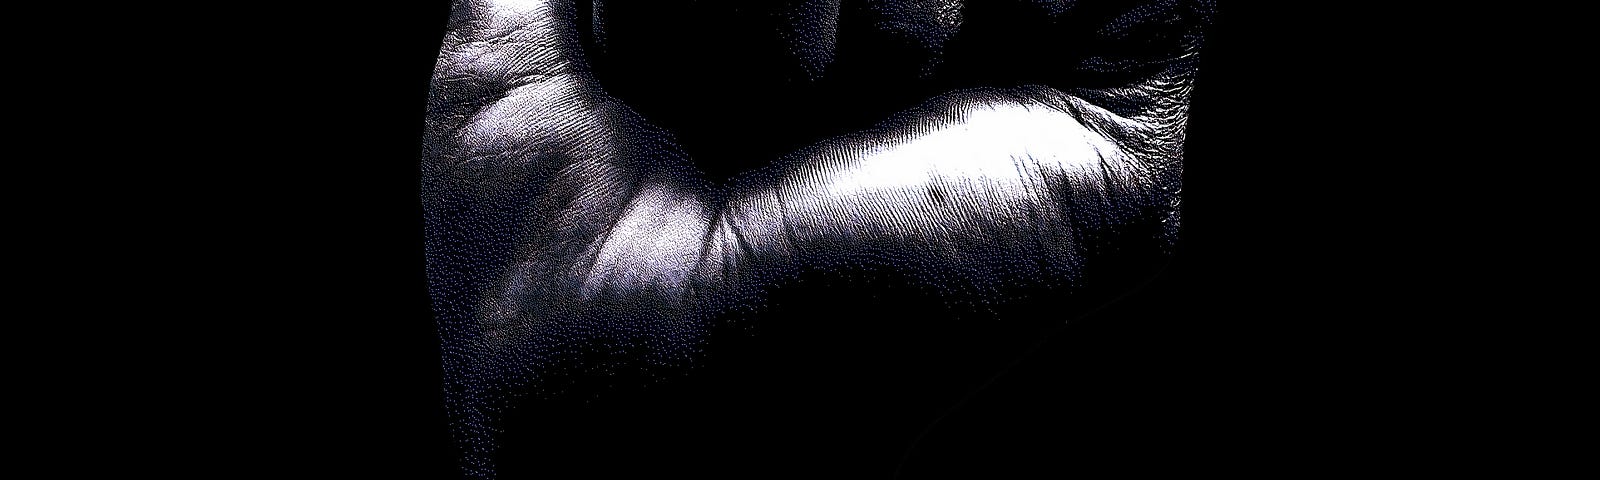 A clenched, dark skinned, fore-arm and fist raised straight up in significance.